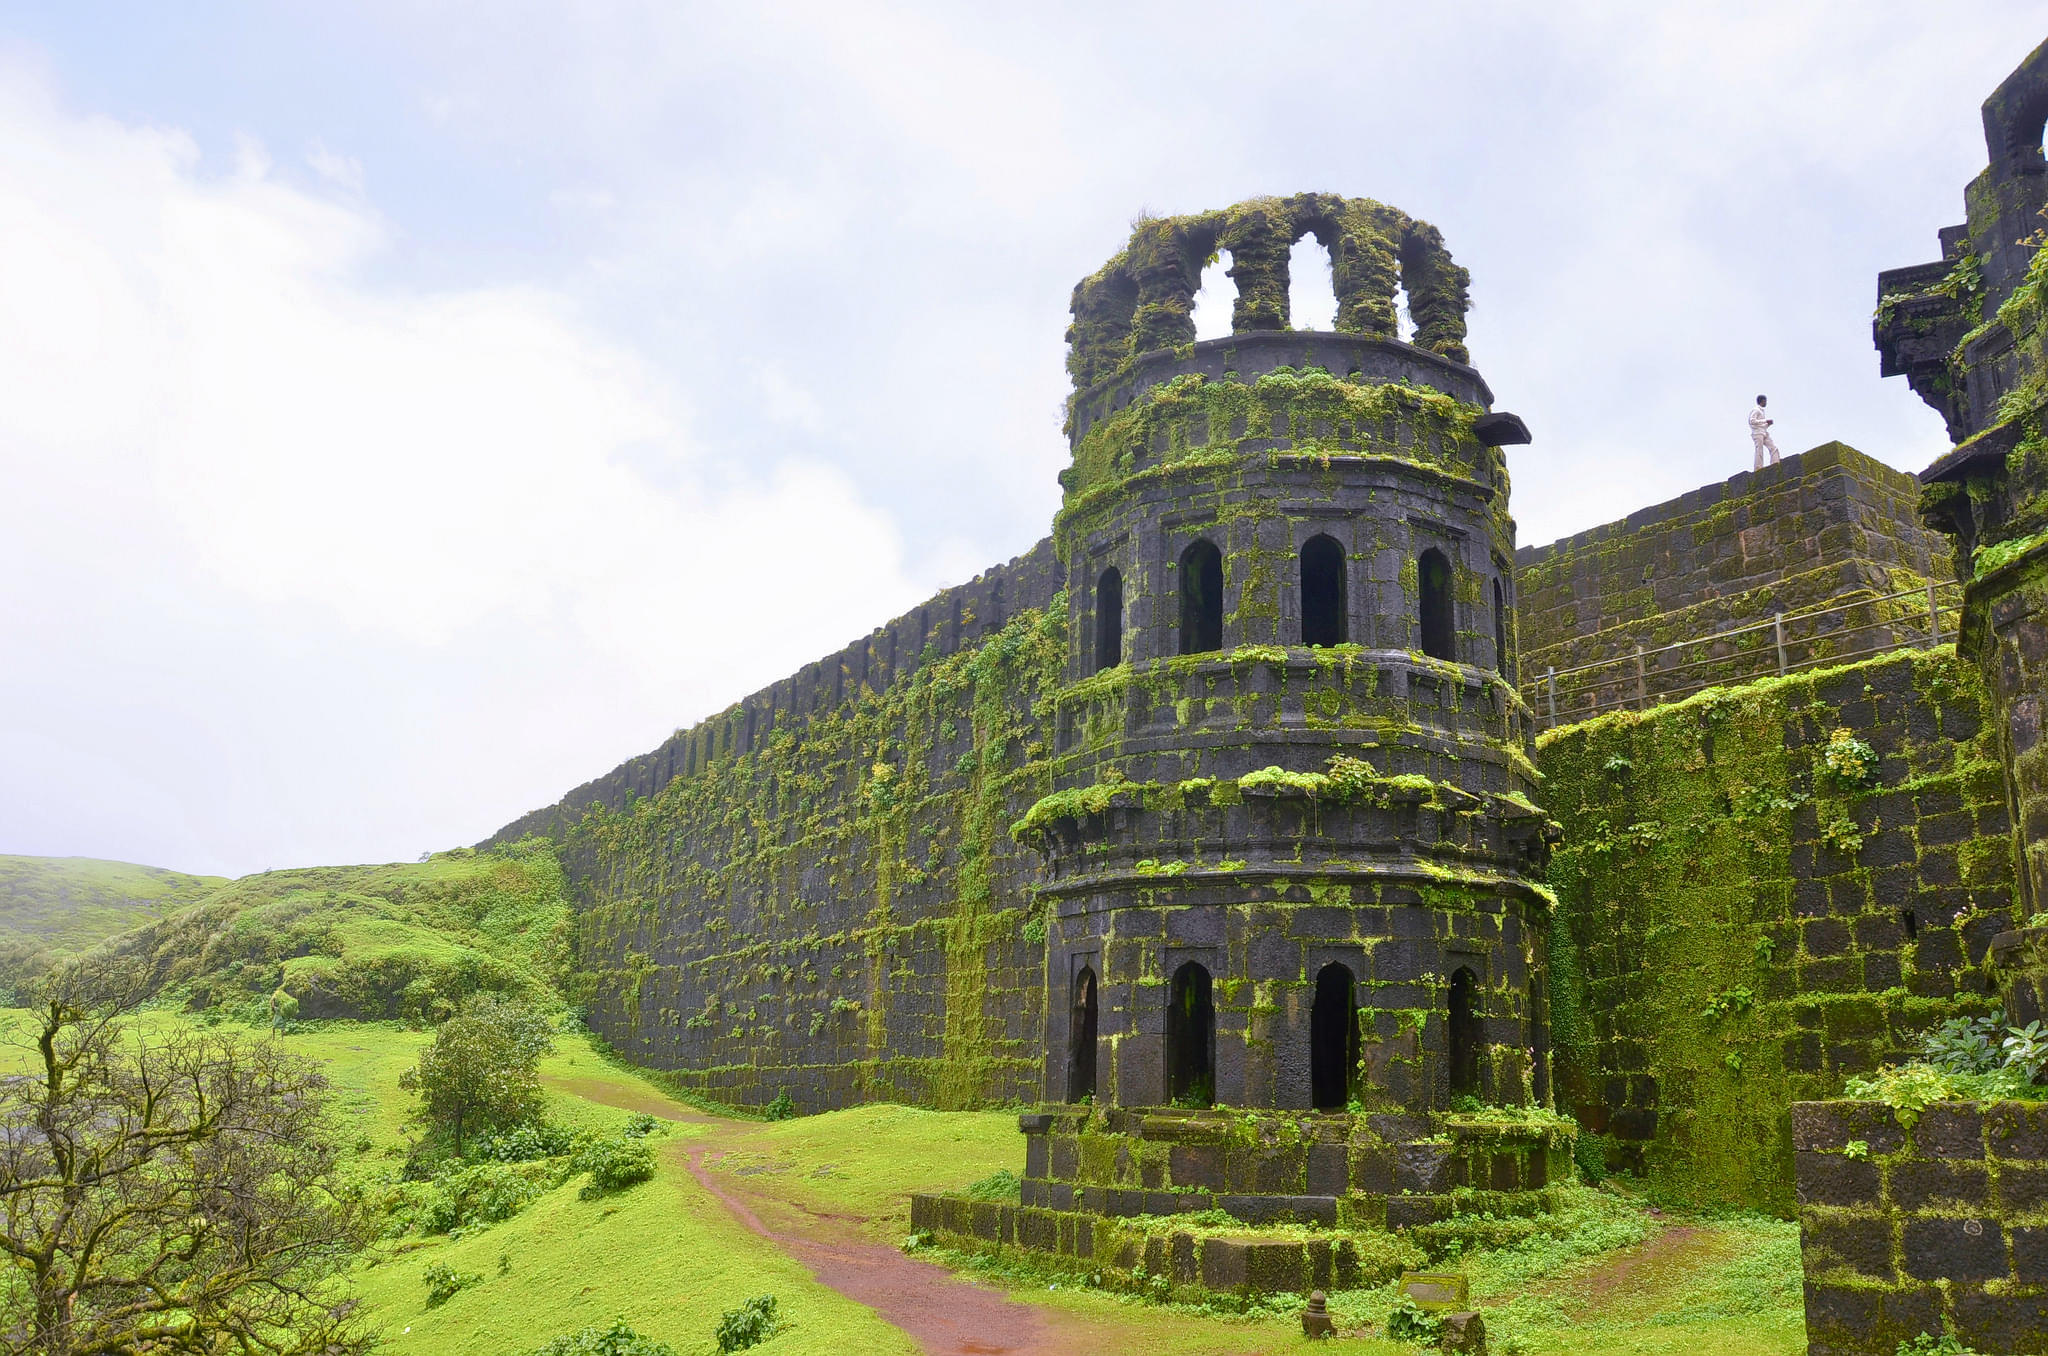 Raigad Fort Overview